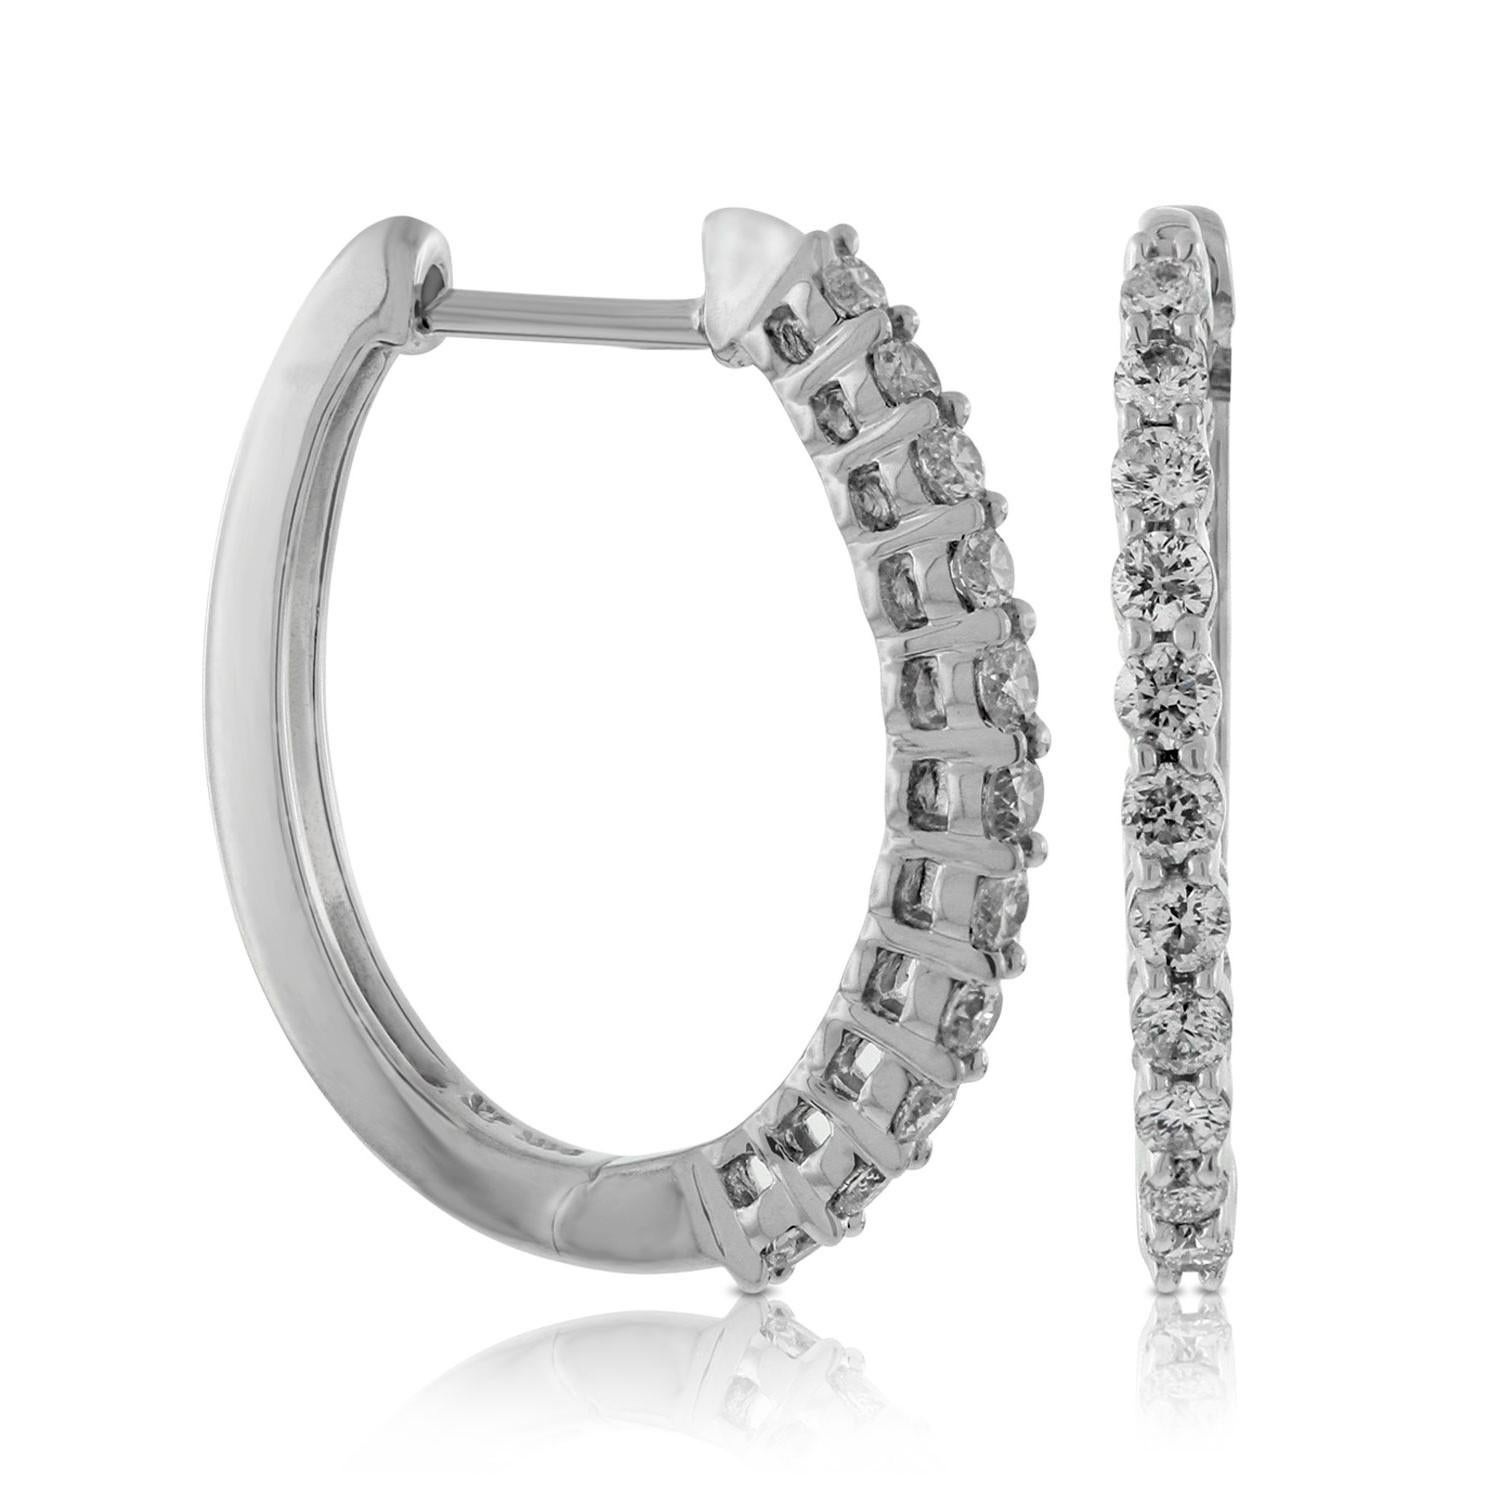 Nothing says luxury like an incredible pair of diamond oval hoop earrings. These stunning brightly polished 14 karat white gold outside oval-shaped hoop earrings feature a total of 24 round brilliant cut diamonds totaling .50 carats are prong set on